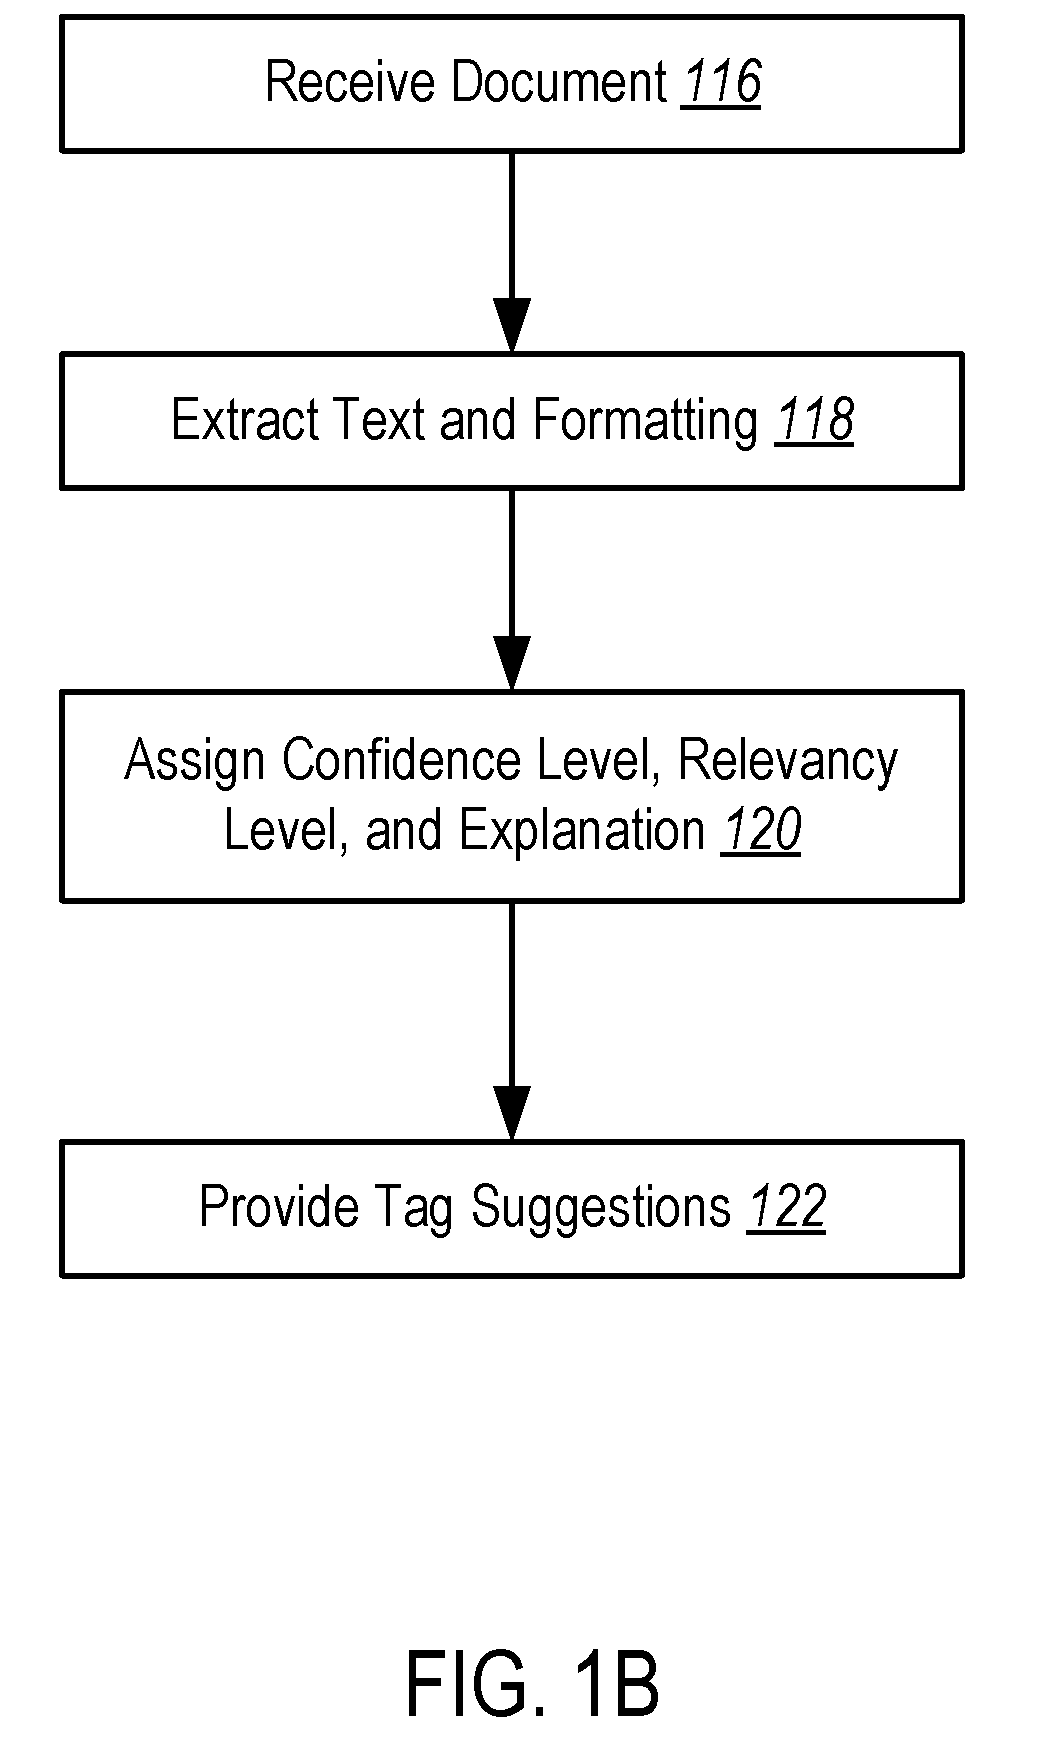 Systems and methods for document processing using machine learning